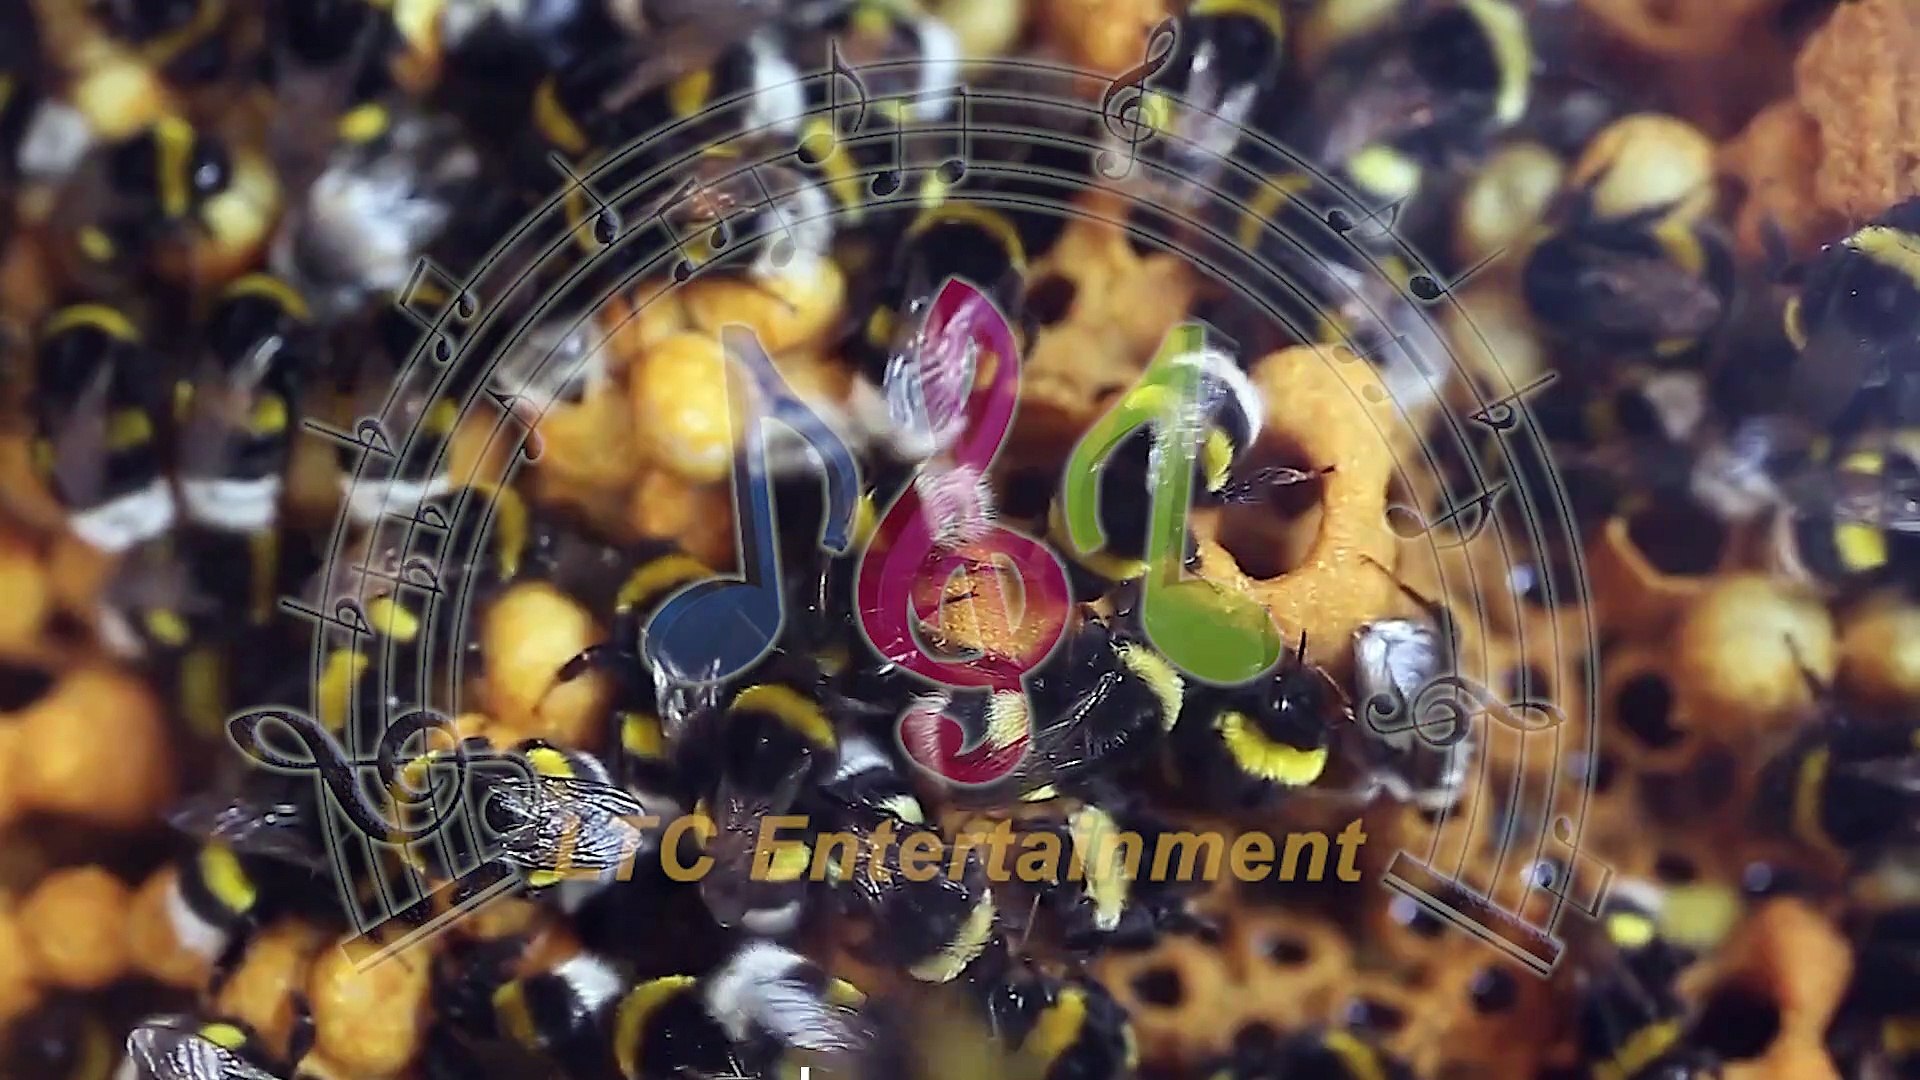 The Flight Of The Bumble-Bee - Music composed by Li jun Chang